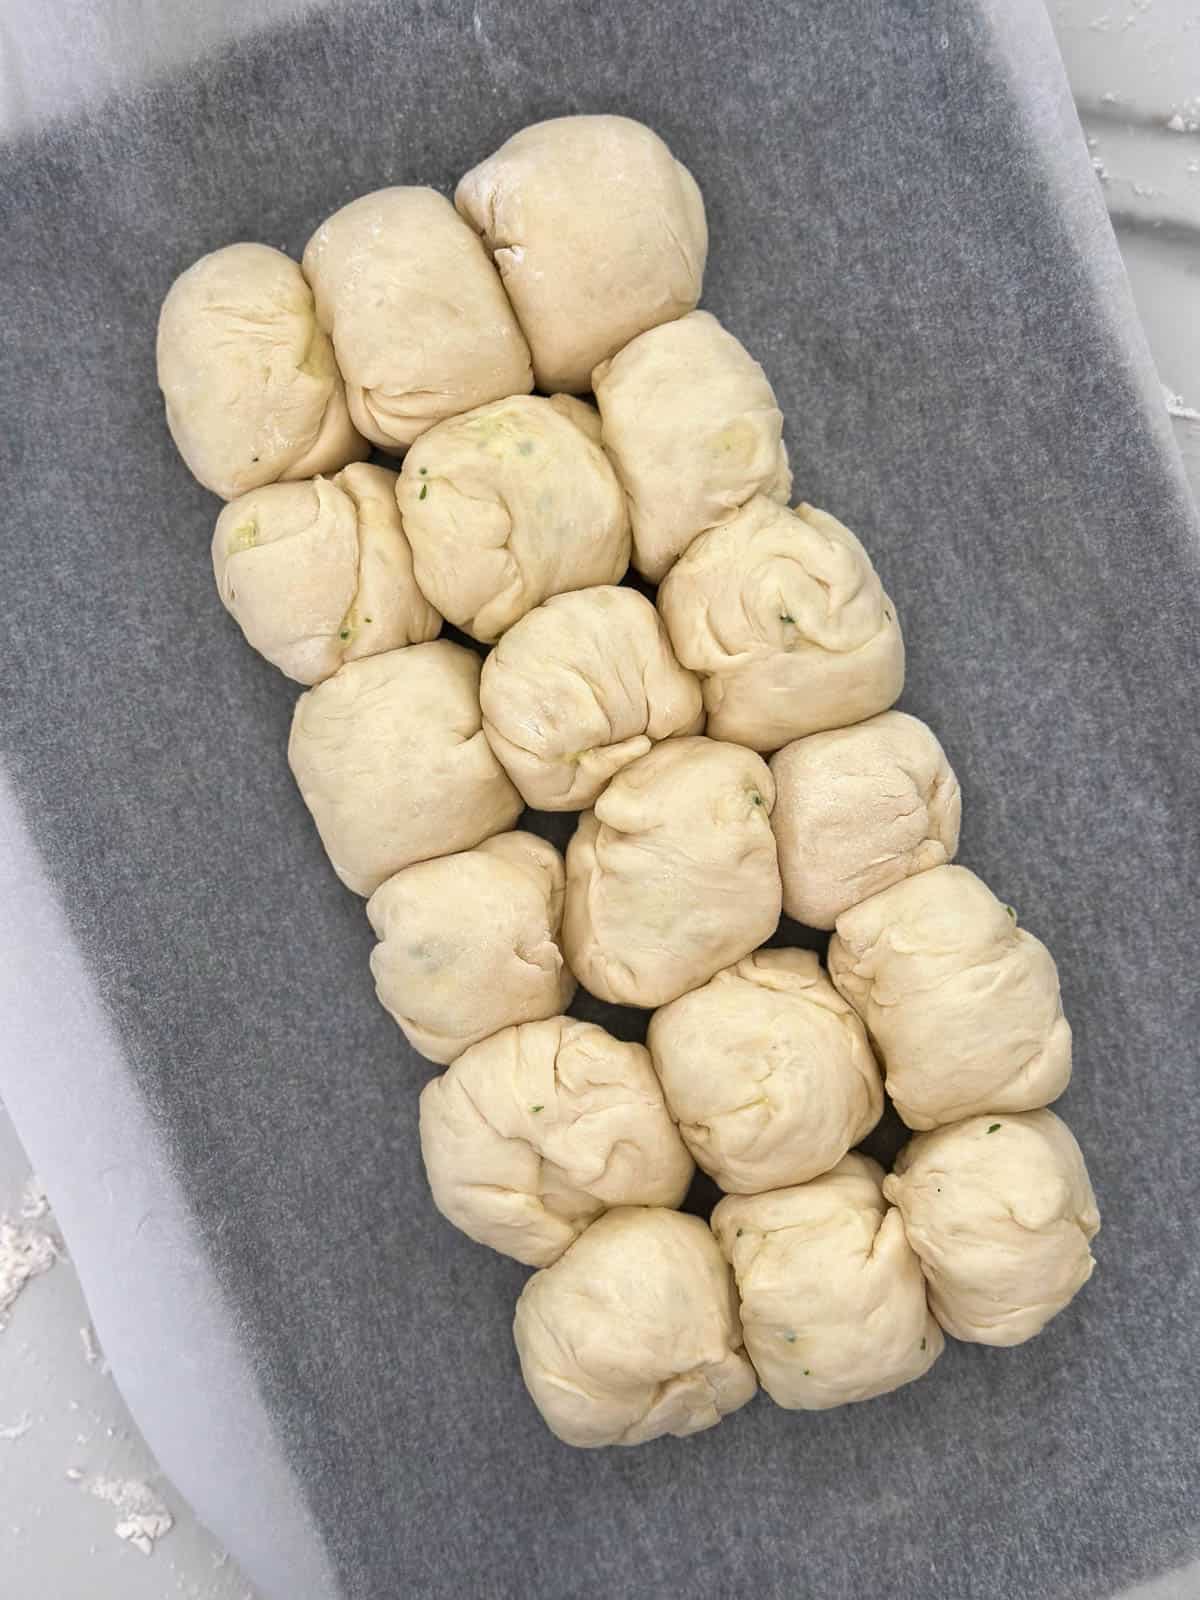 Thermomix bread dough shaped into balls and placed on a baking tray. 